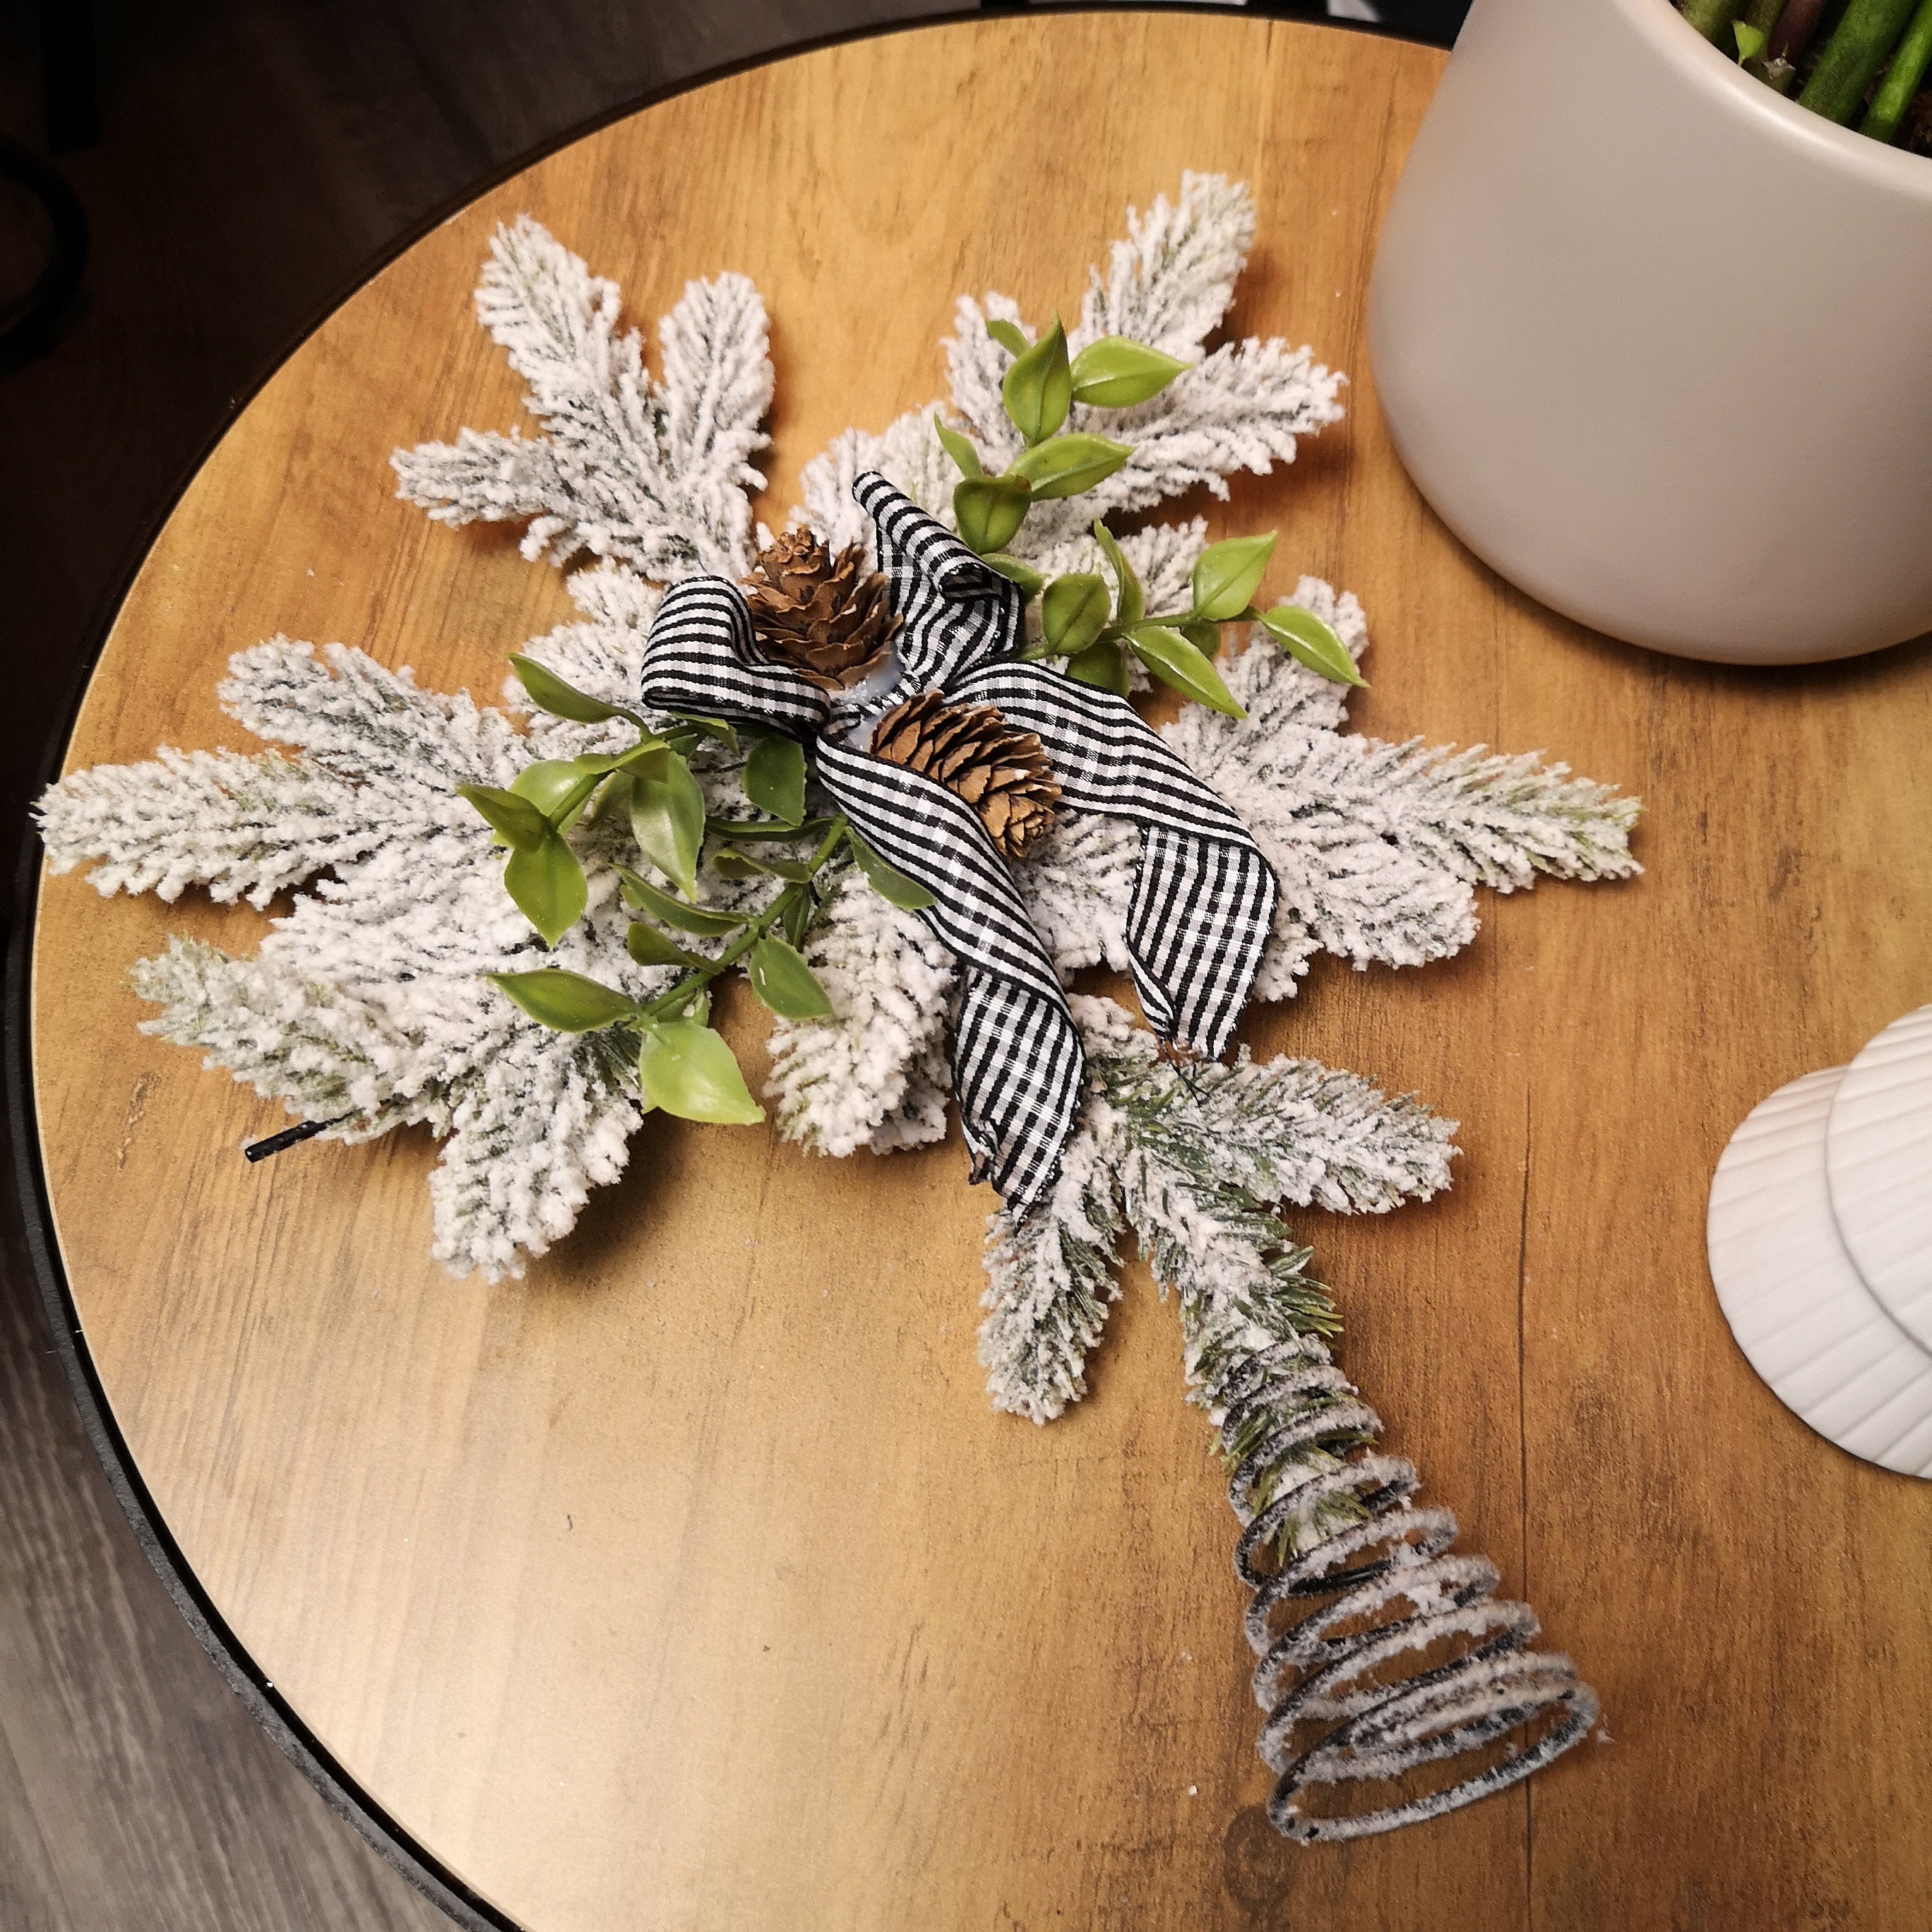 33cm White Fir Snowflake with Pinecones and Berries Christmas Tree Topper